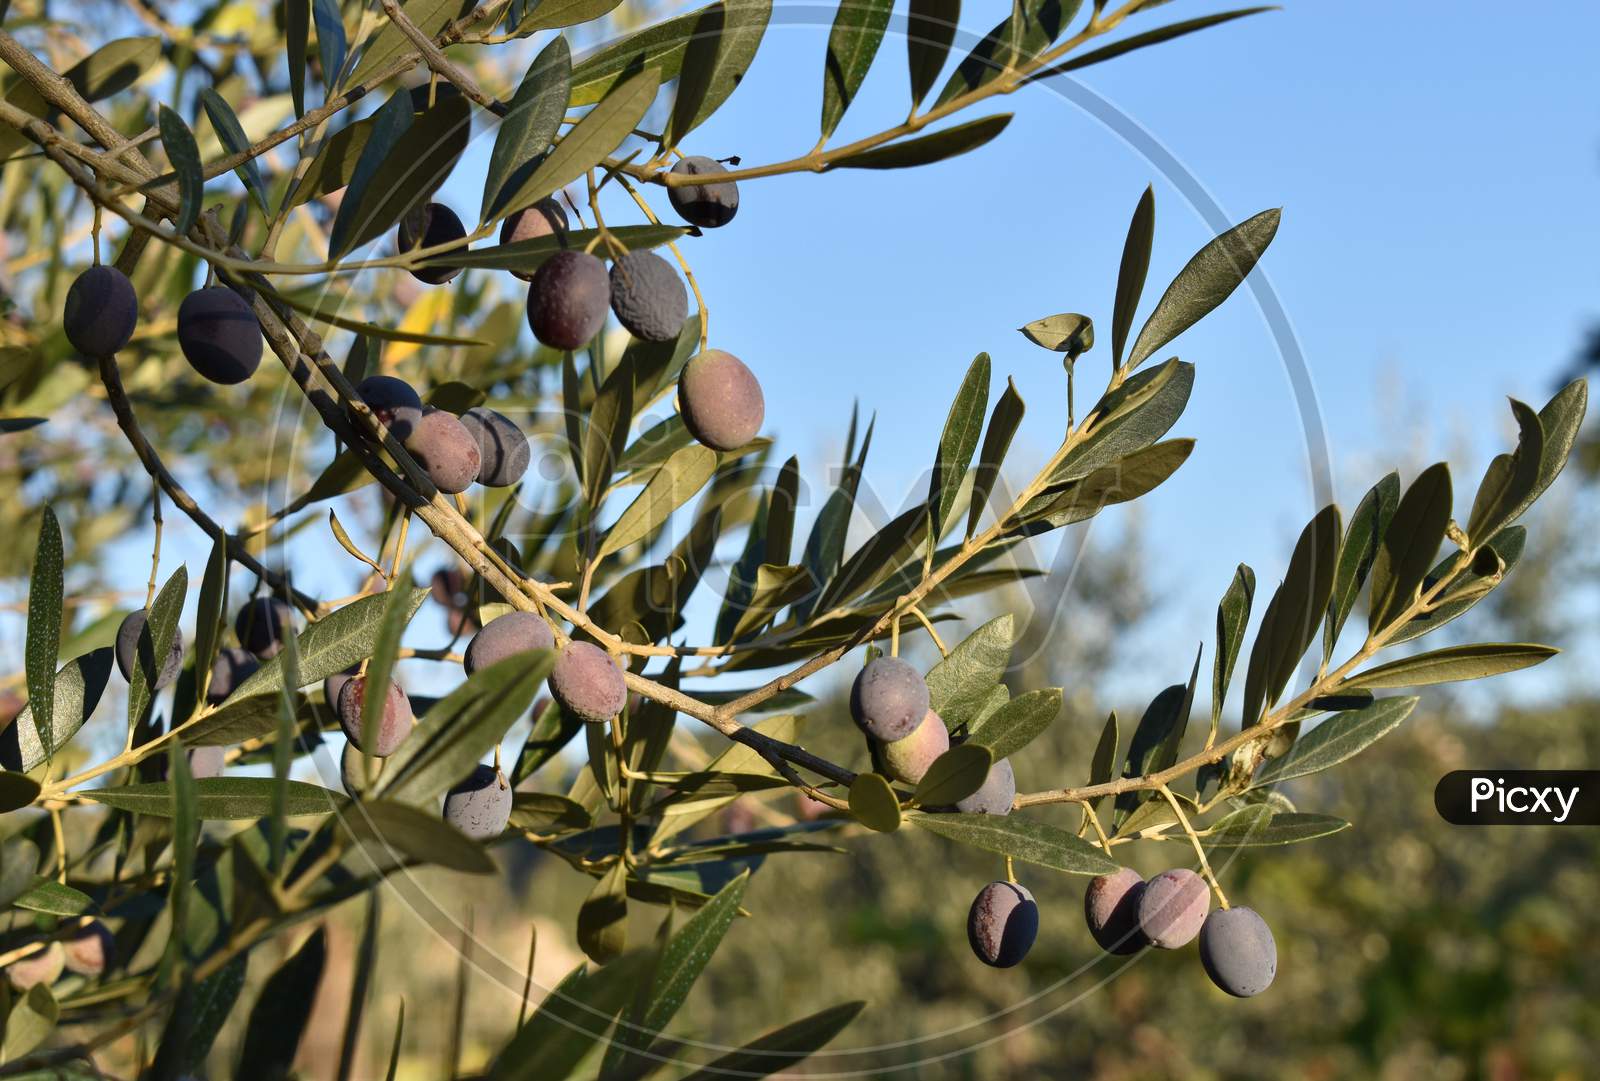 The olive tree on the soft evening sun in Tuscany Italy